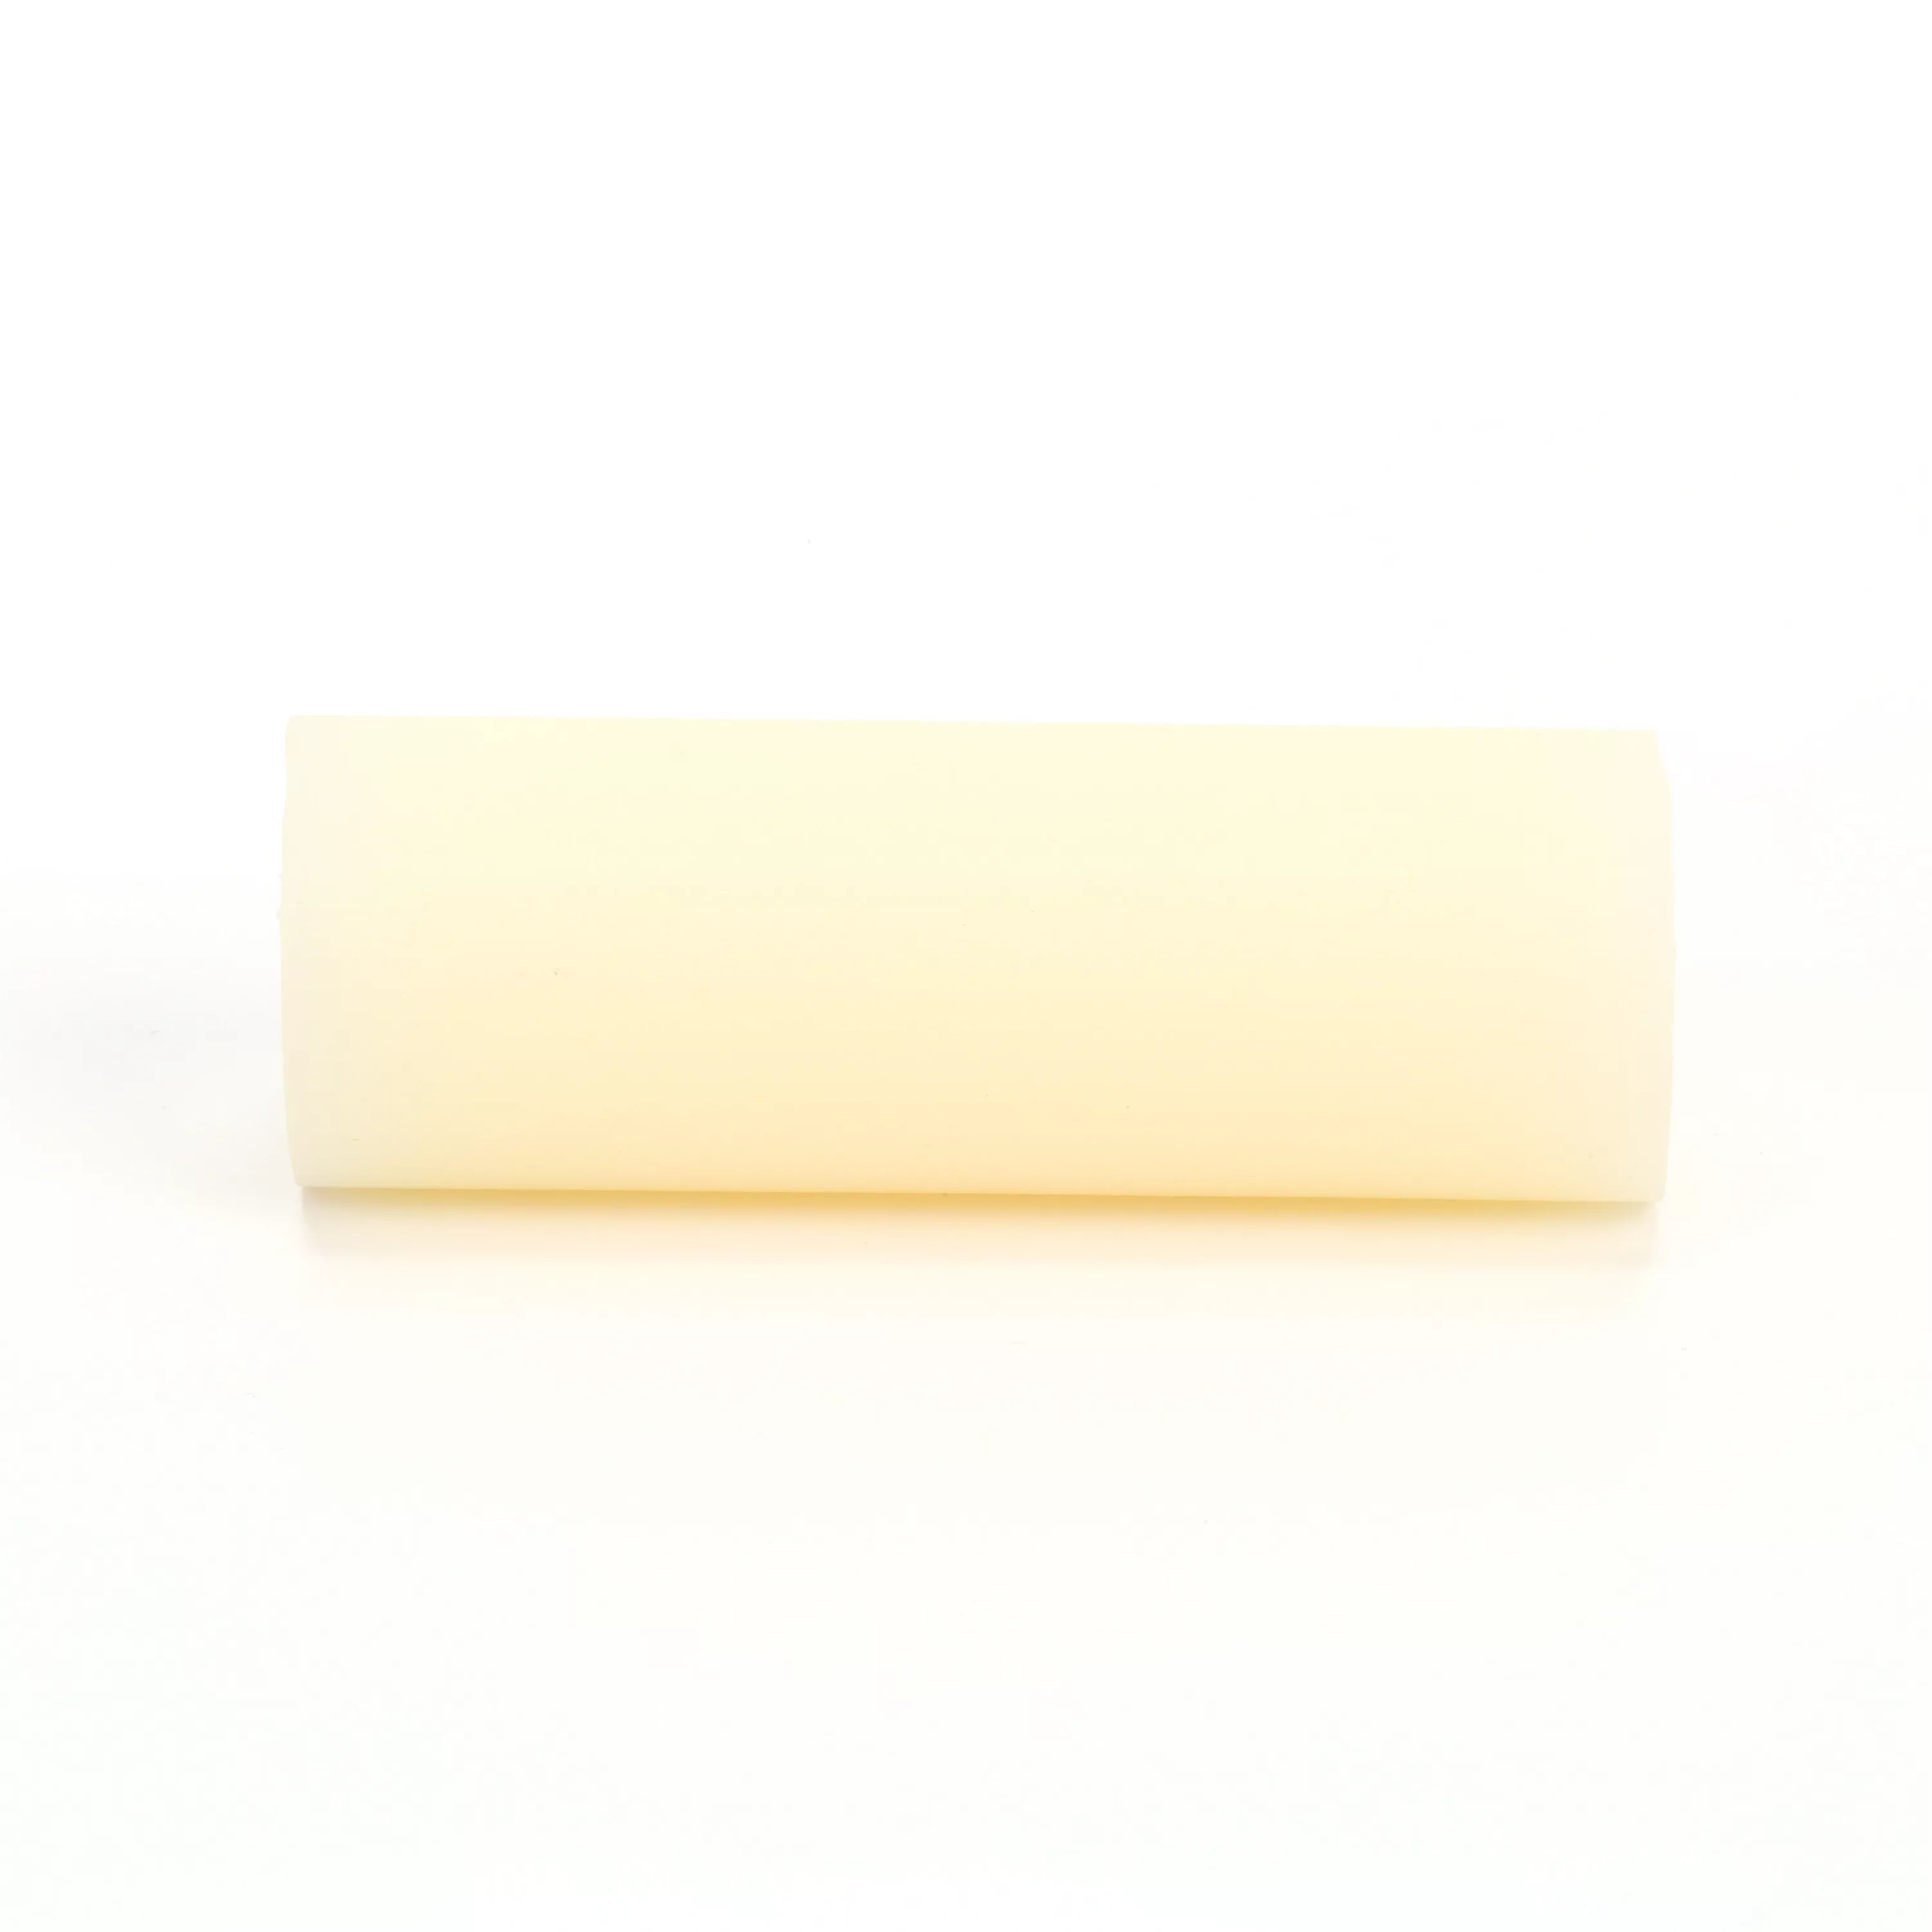 Product Number 3748-PG | 3M™ Hot Melt Adhesive 3748 PG